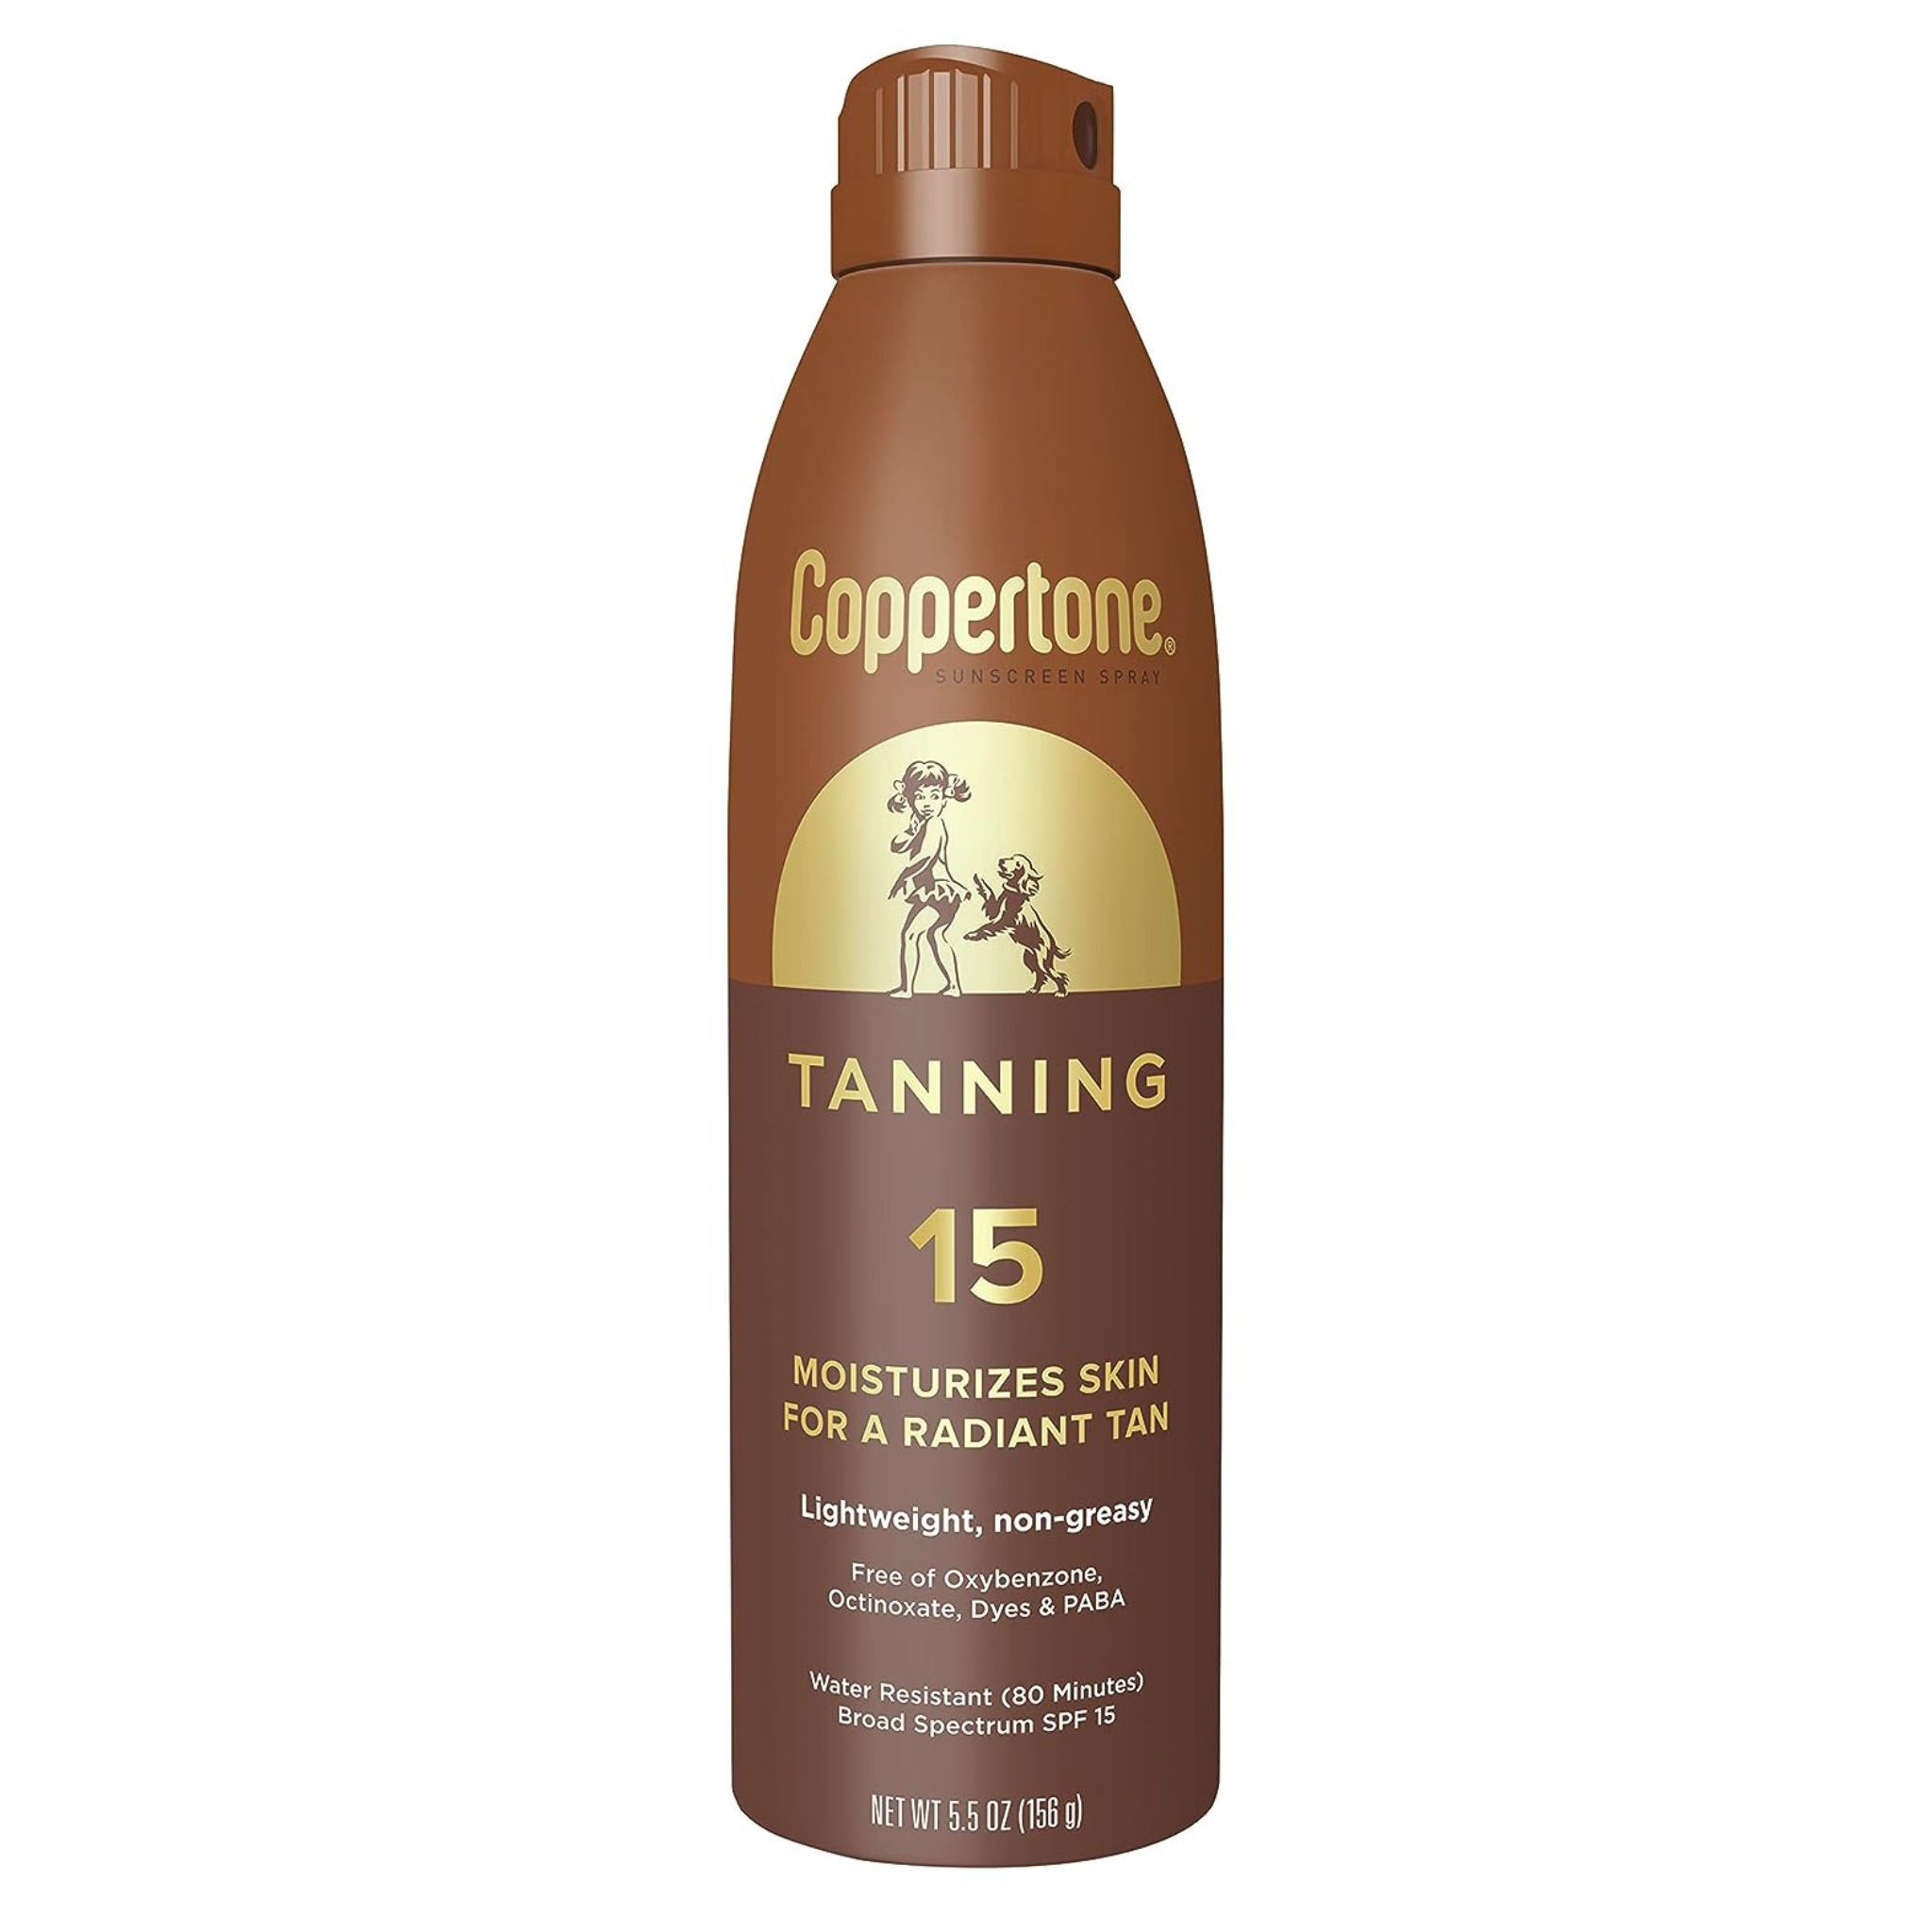 Save on Coppertone Sunscreen